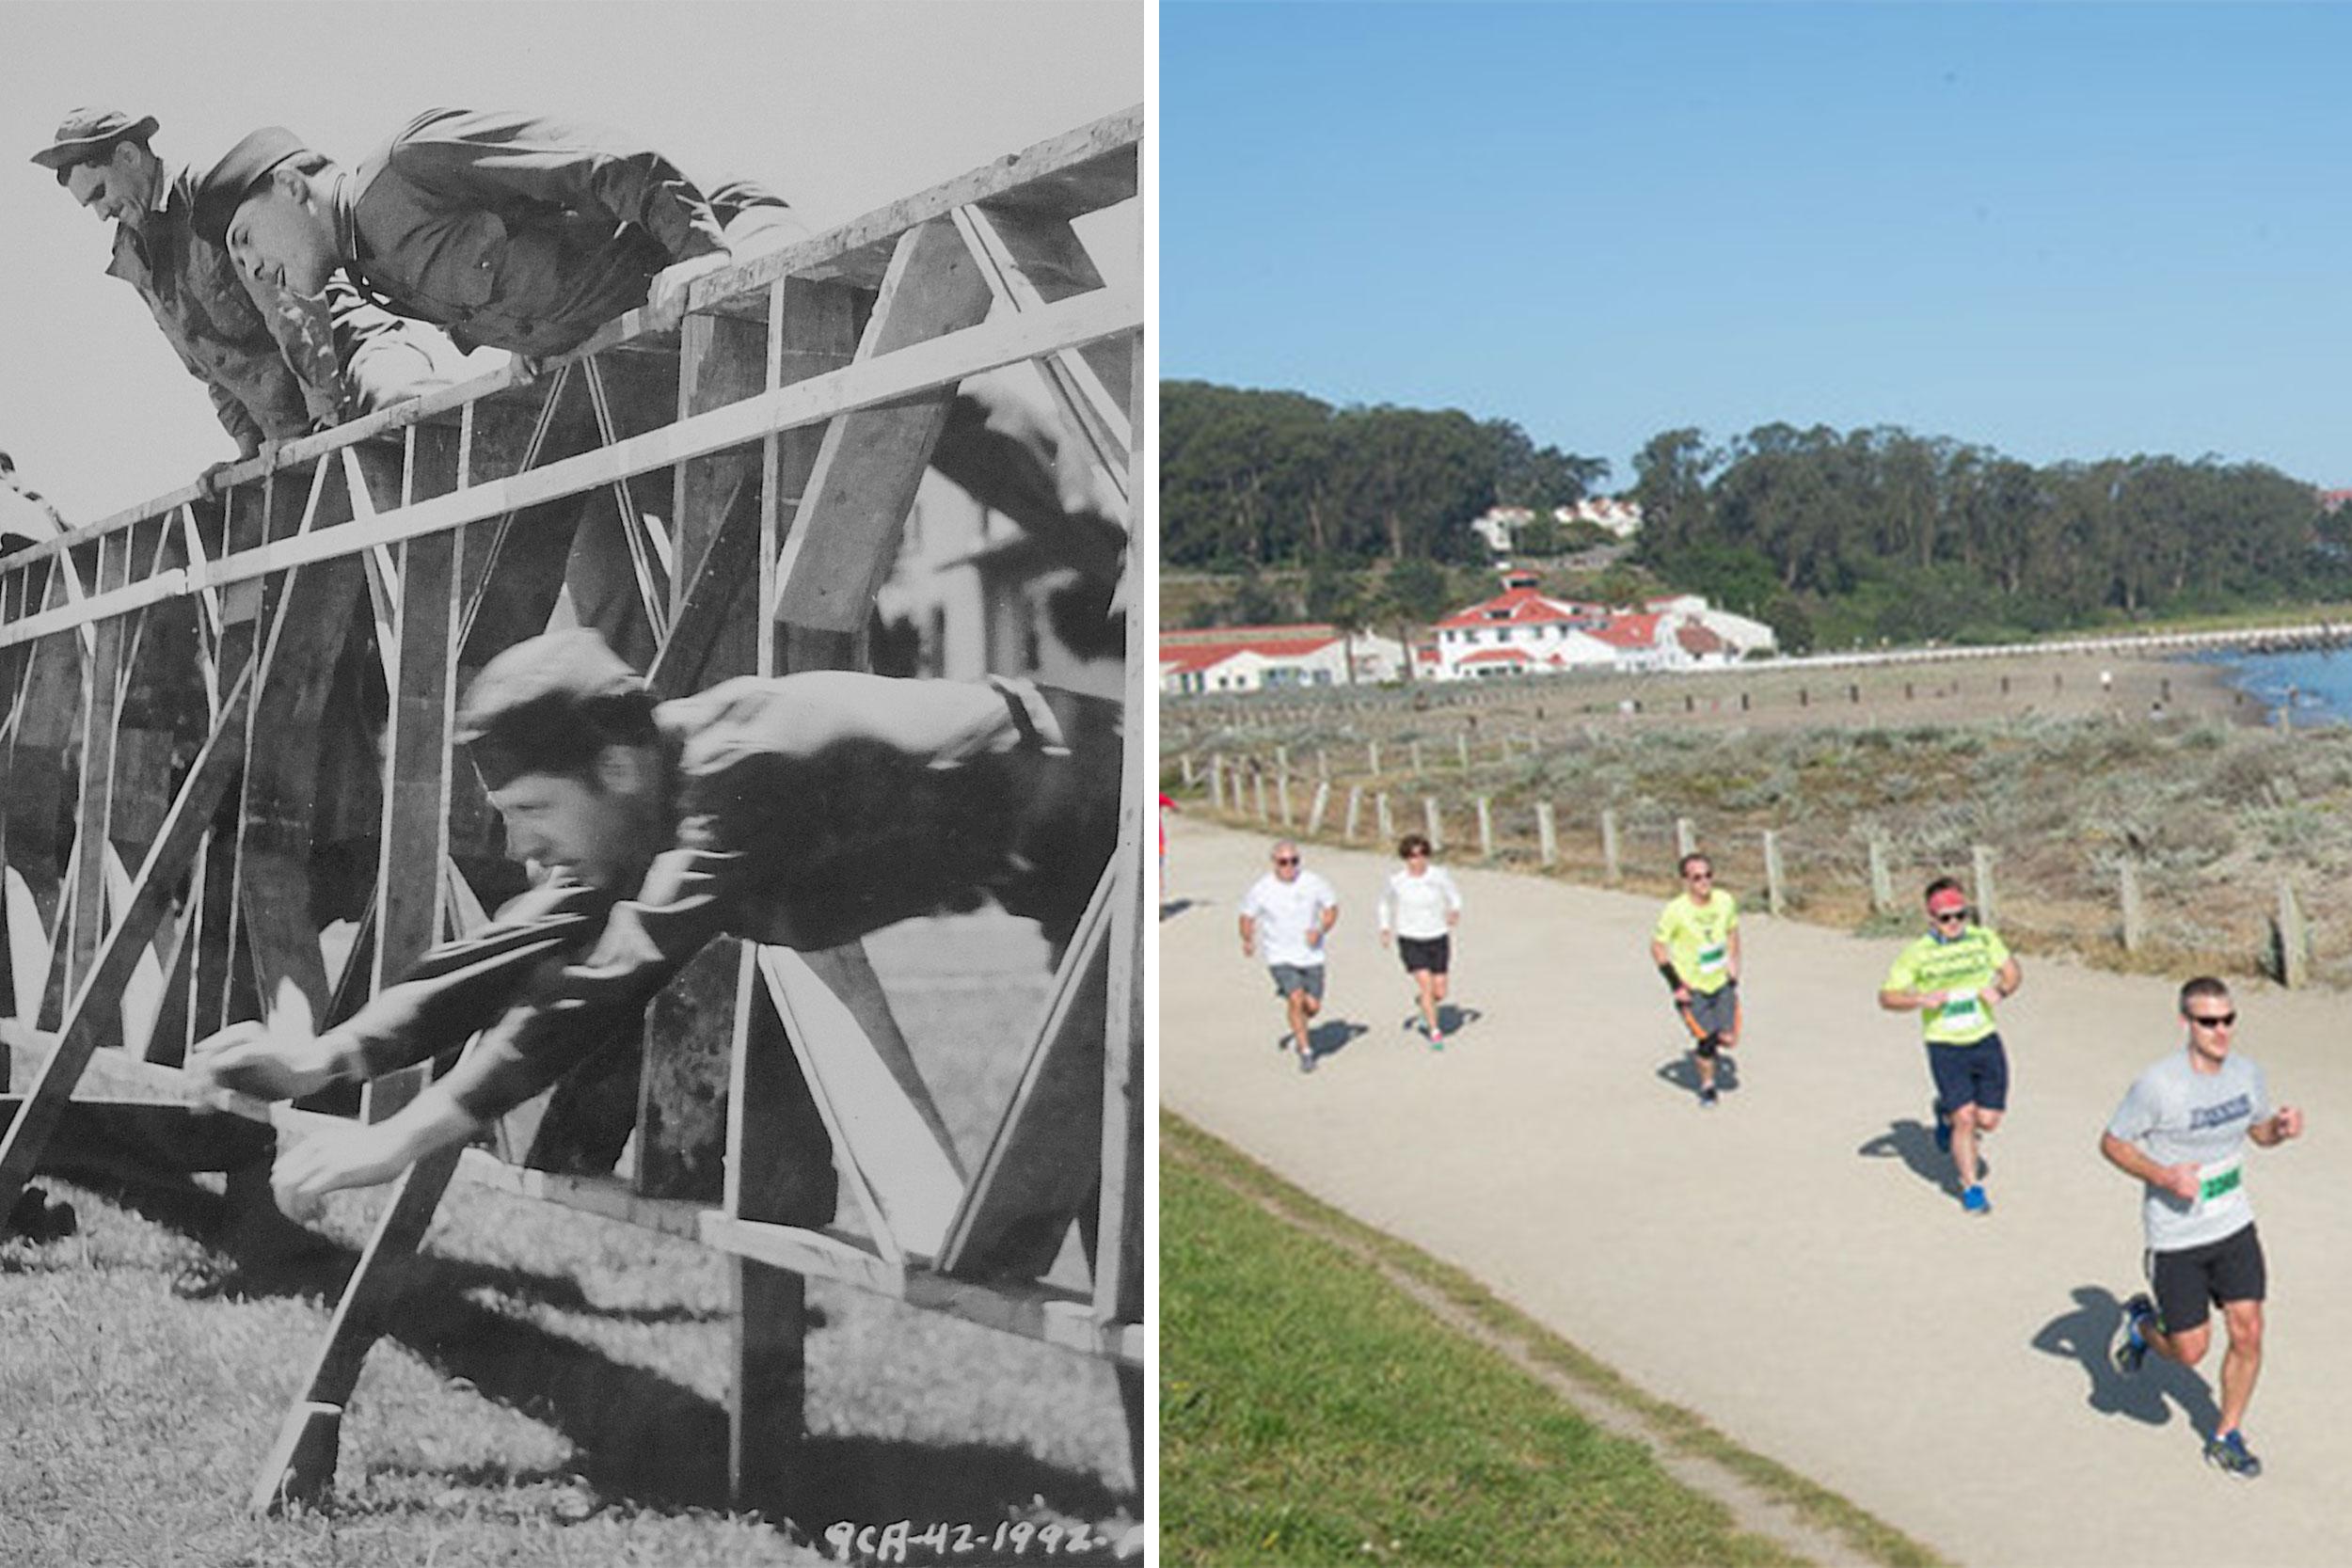 Soldiers racing on left. Modern day race runners on Crissy Field trail on right.